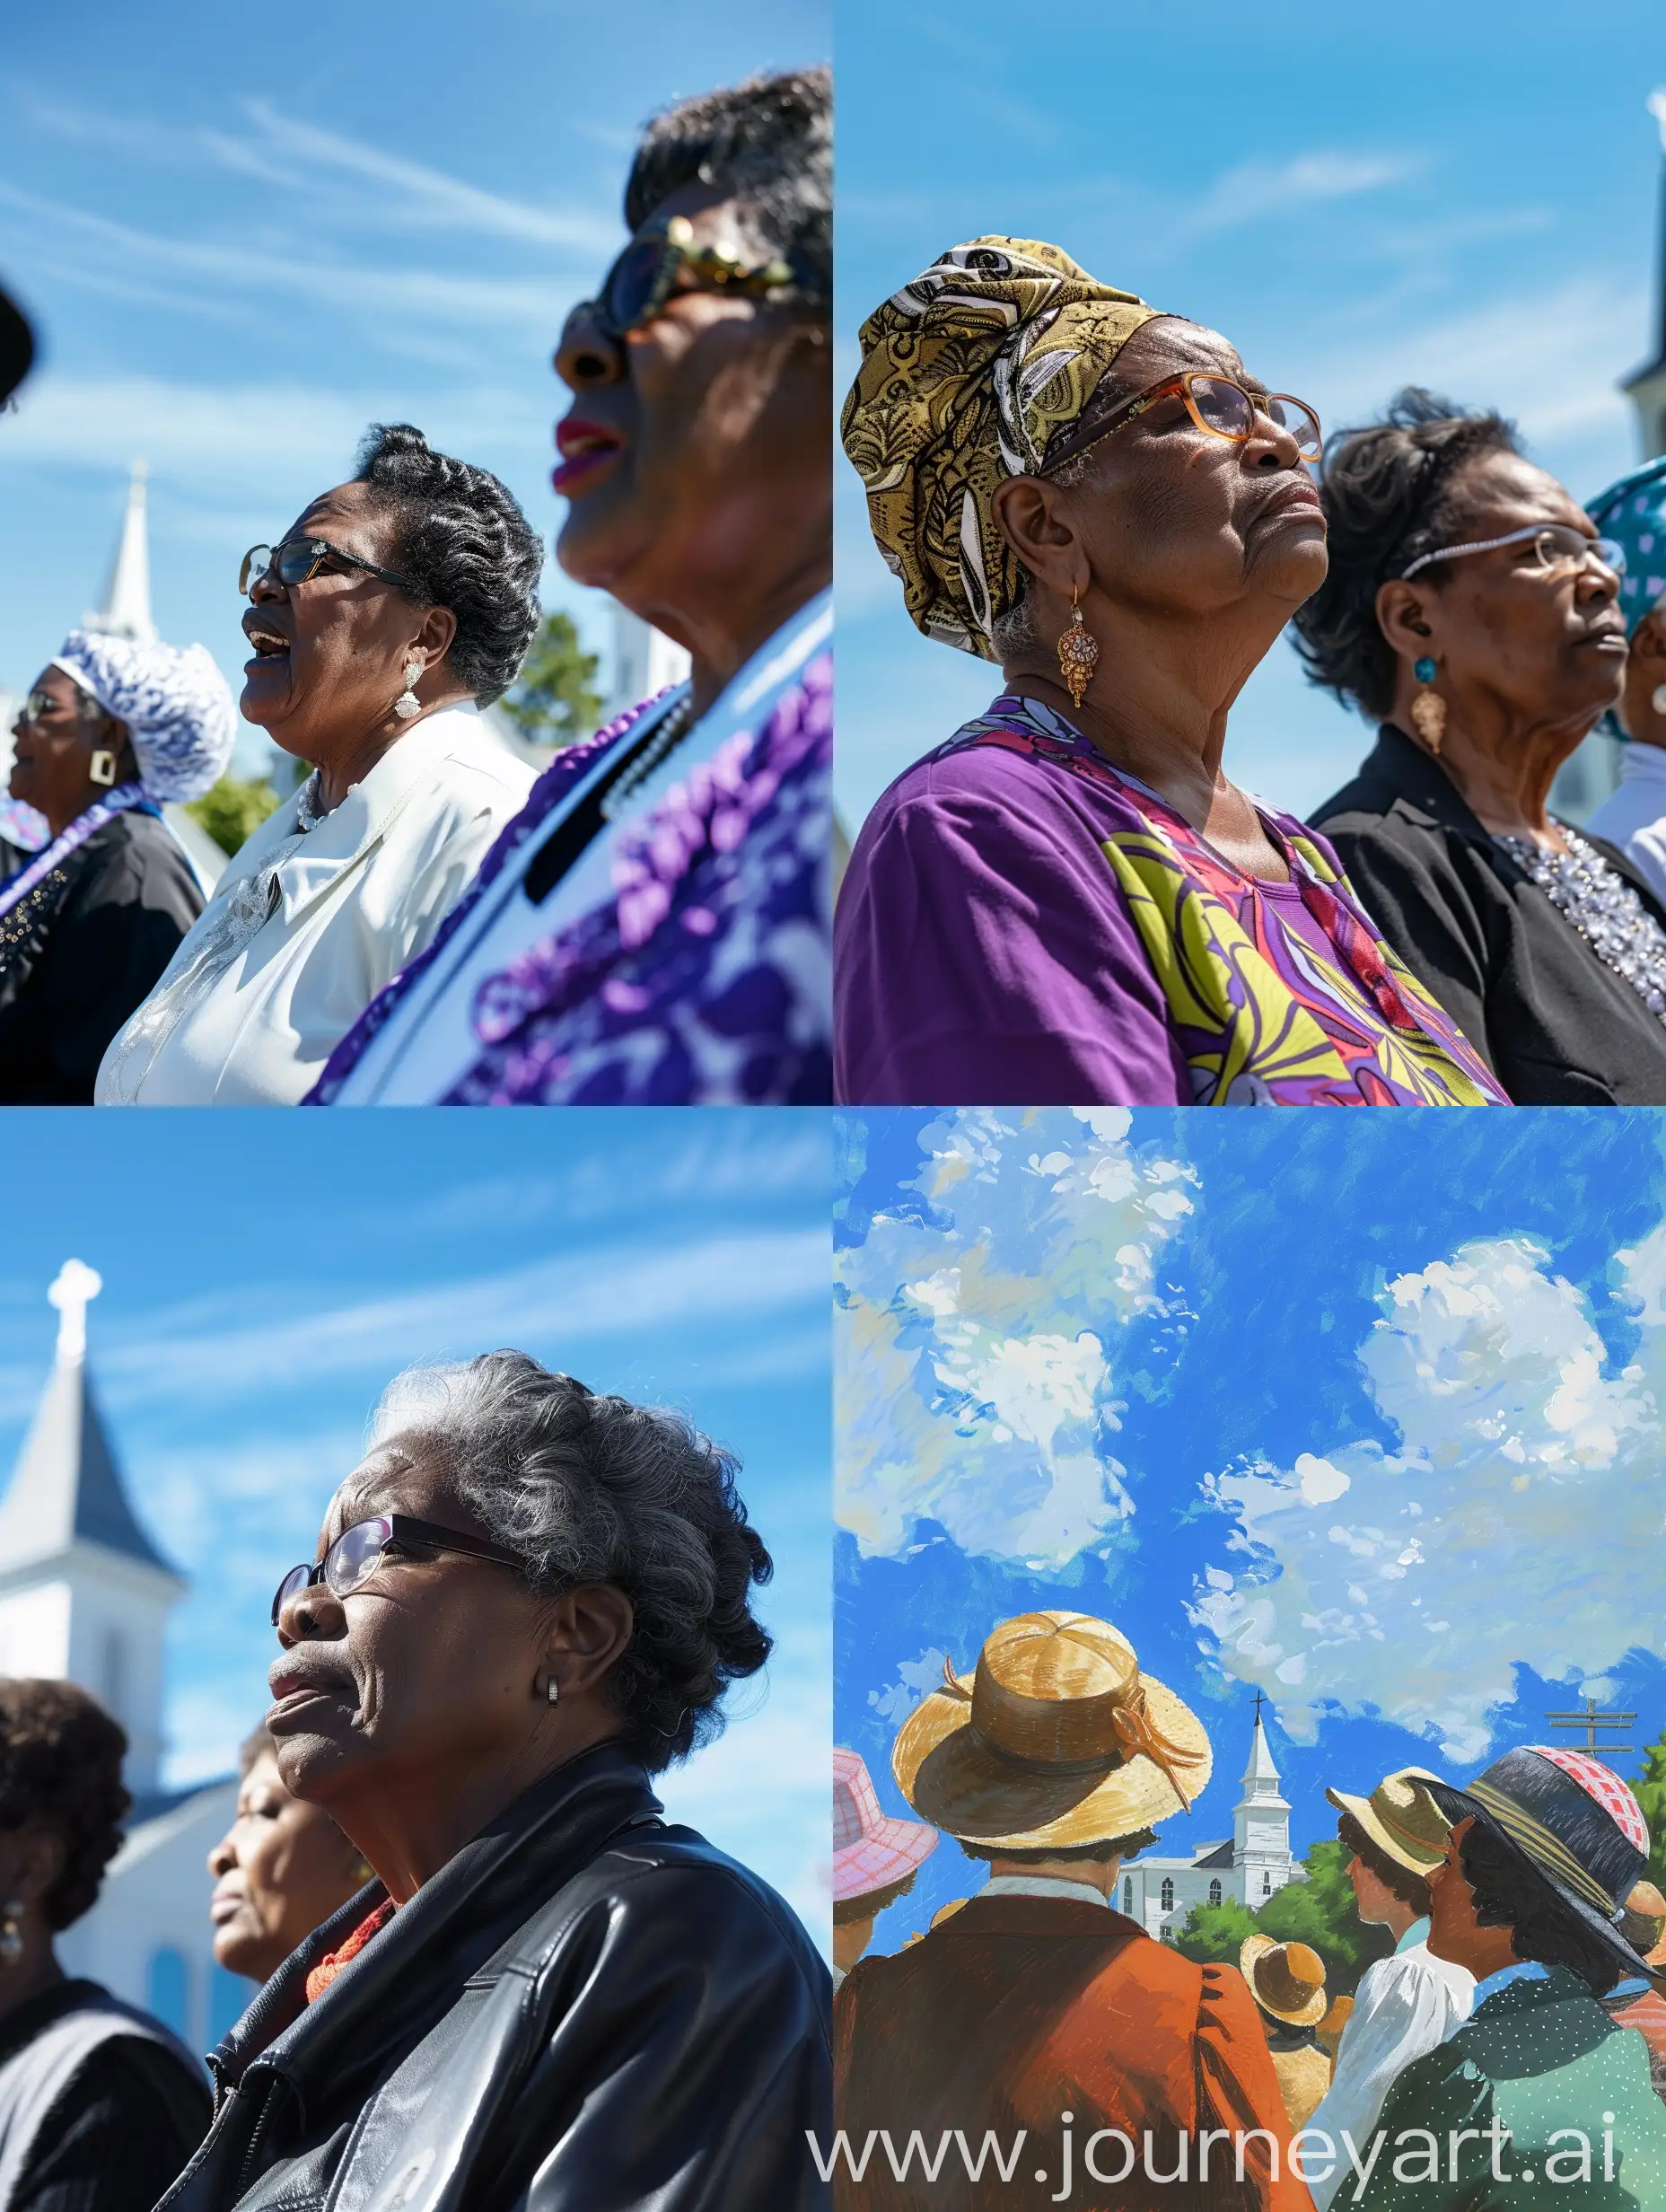 Methodist women preachers, with churches in the background and blue skies